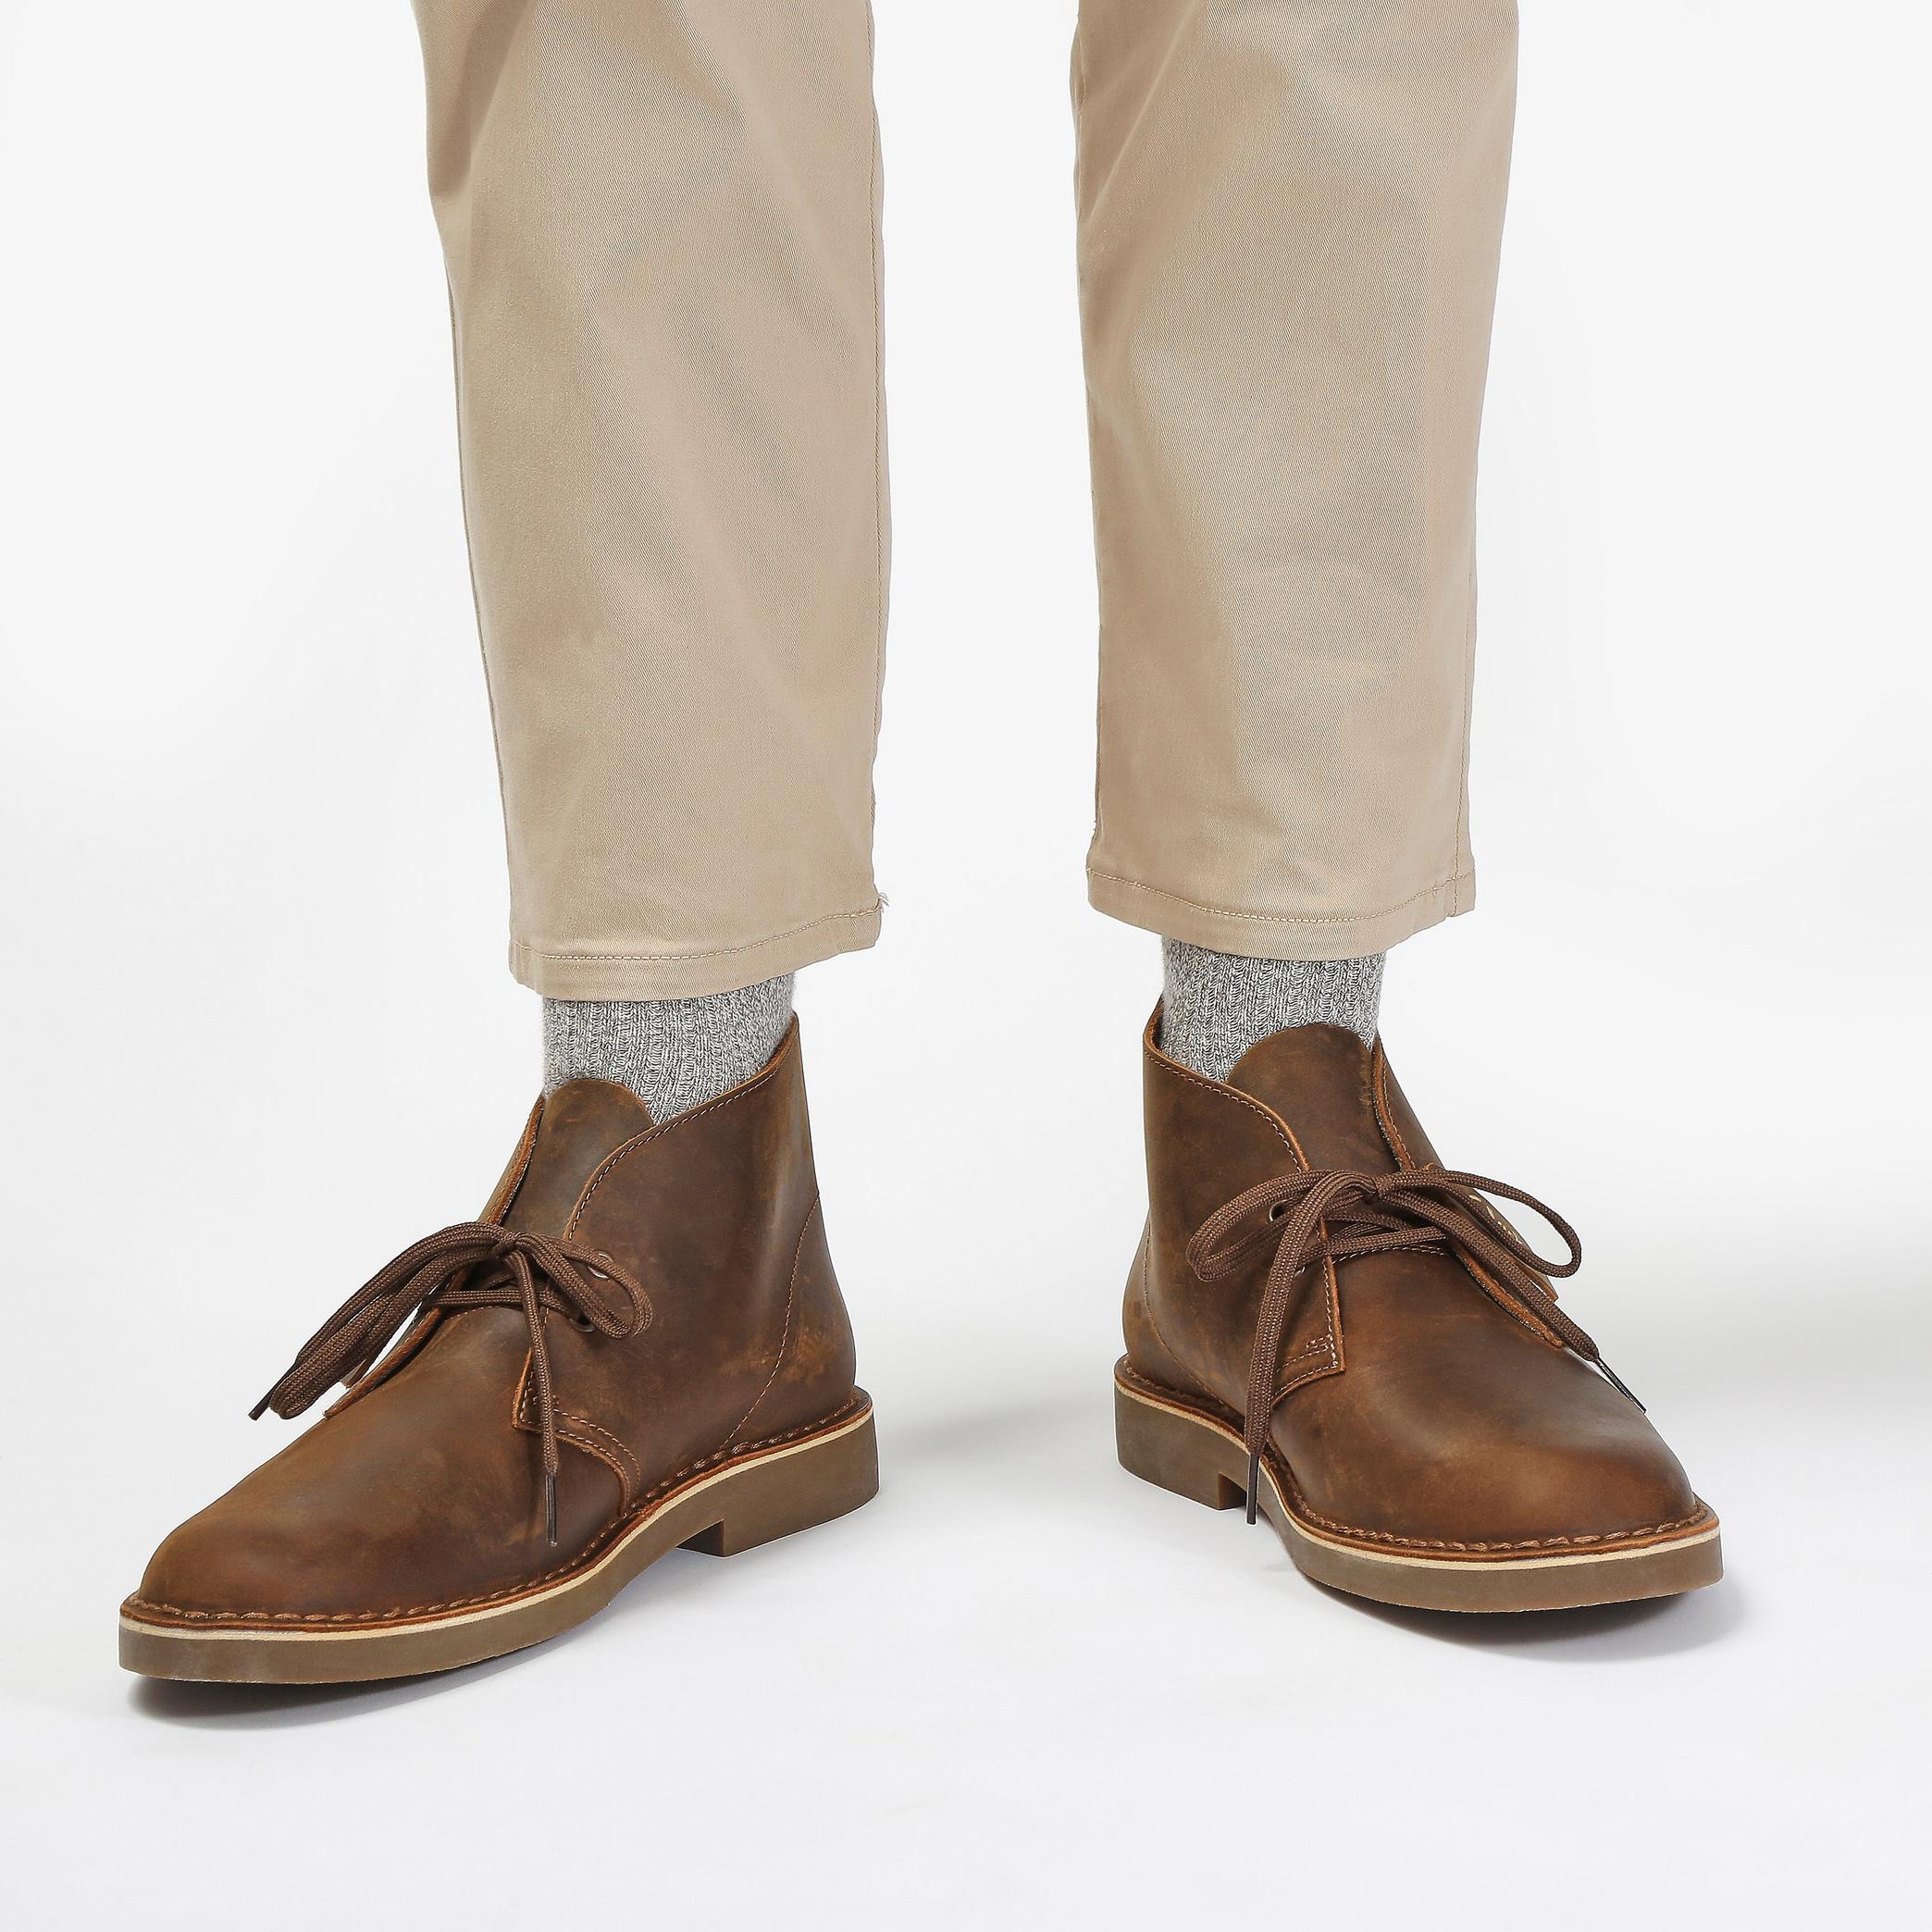 Desert Boot Evo Beeswax Leather Desert Boots, view 2 of 8